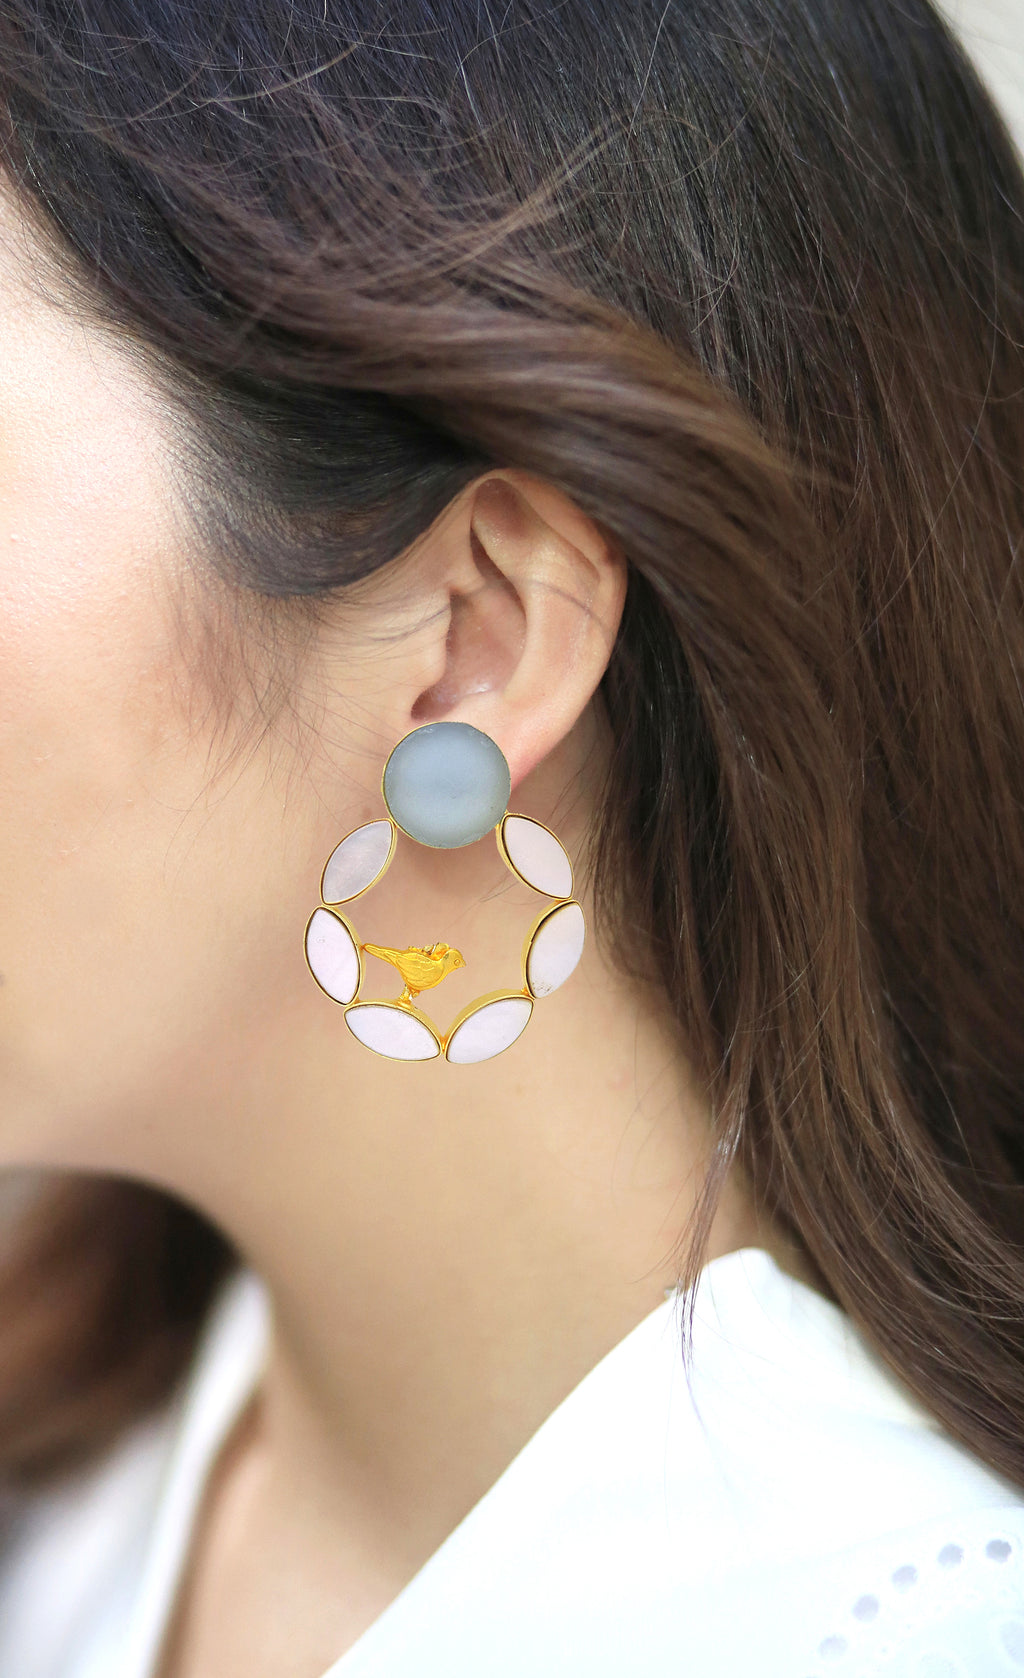 Pearl Cage Earrings (Blue Onyx) - Statement Earrings - Gold-Plated & Hypoallergenic - Made in India - Dubai Jewellery - Dori